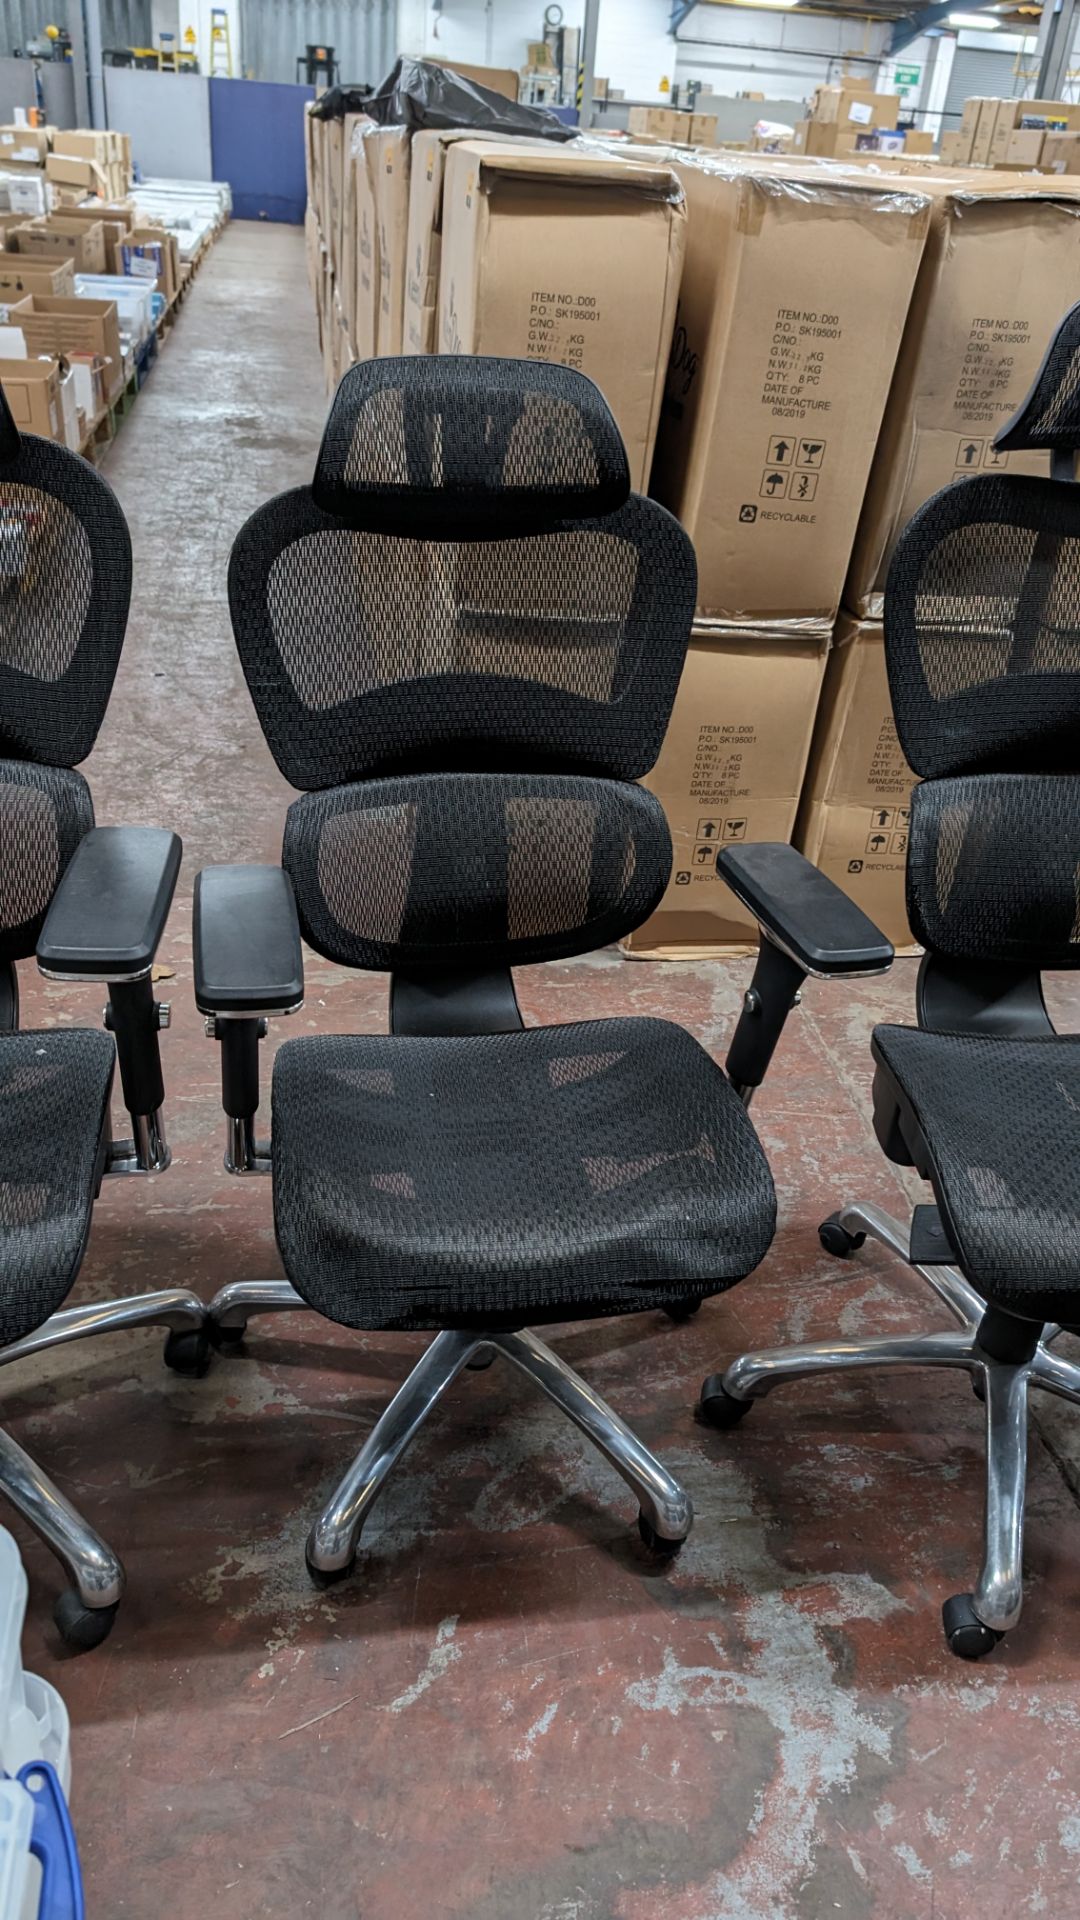 4 off black mesh fabric and chrome modern chairs with arms and headrests. NB: The chairs in lot 24 - Image 5 of 6